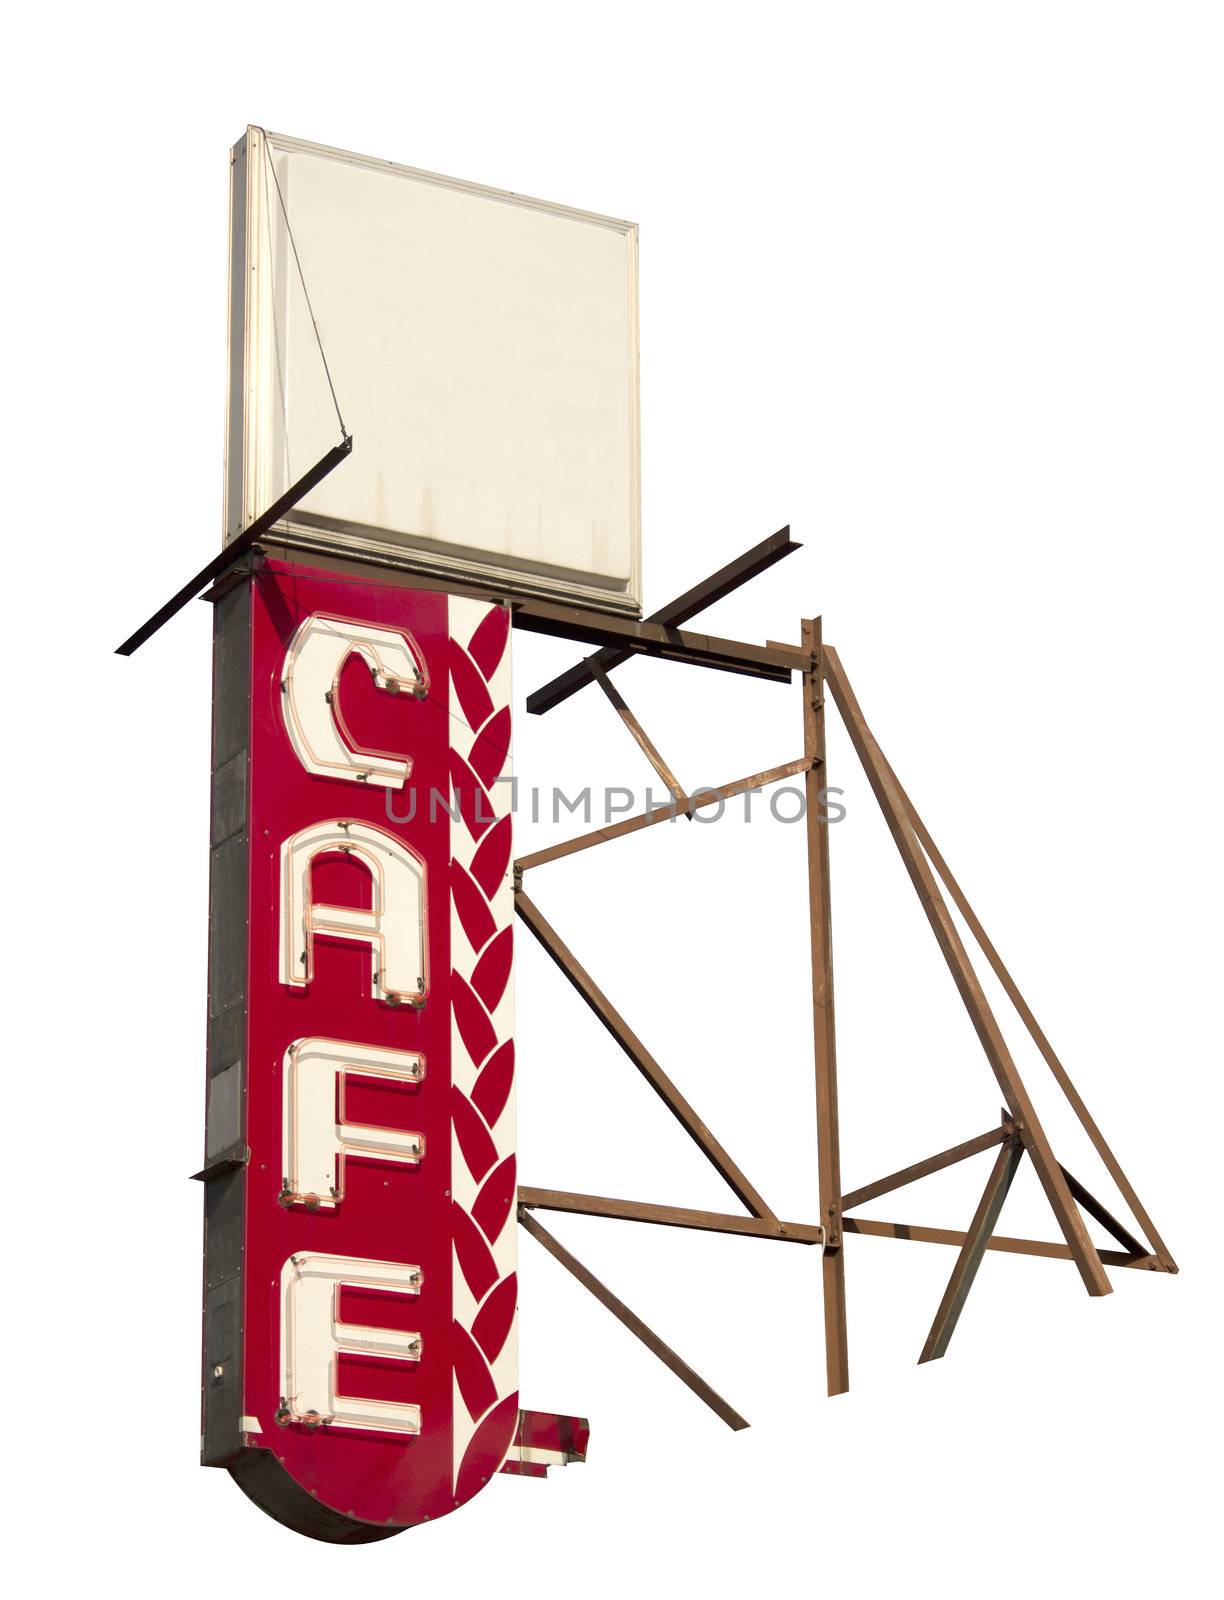 A vintage cafe sign that is neon and isolated on a white background.